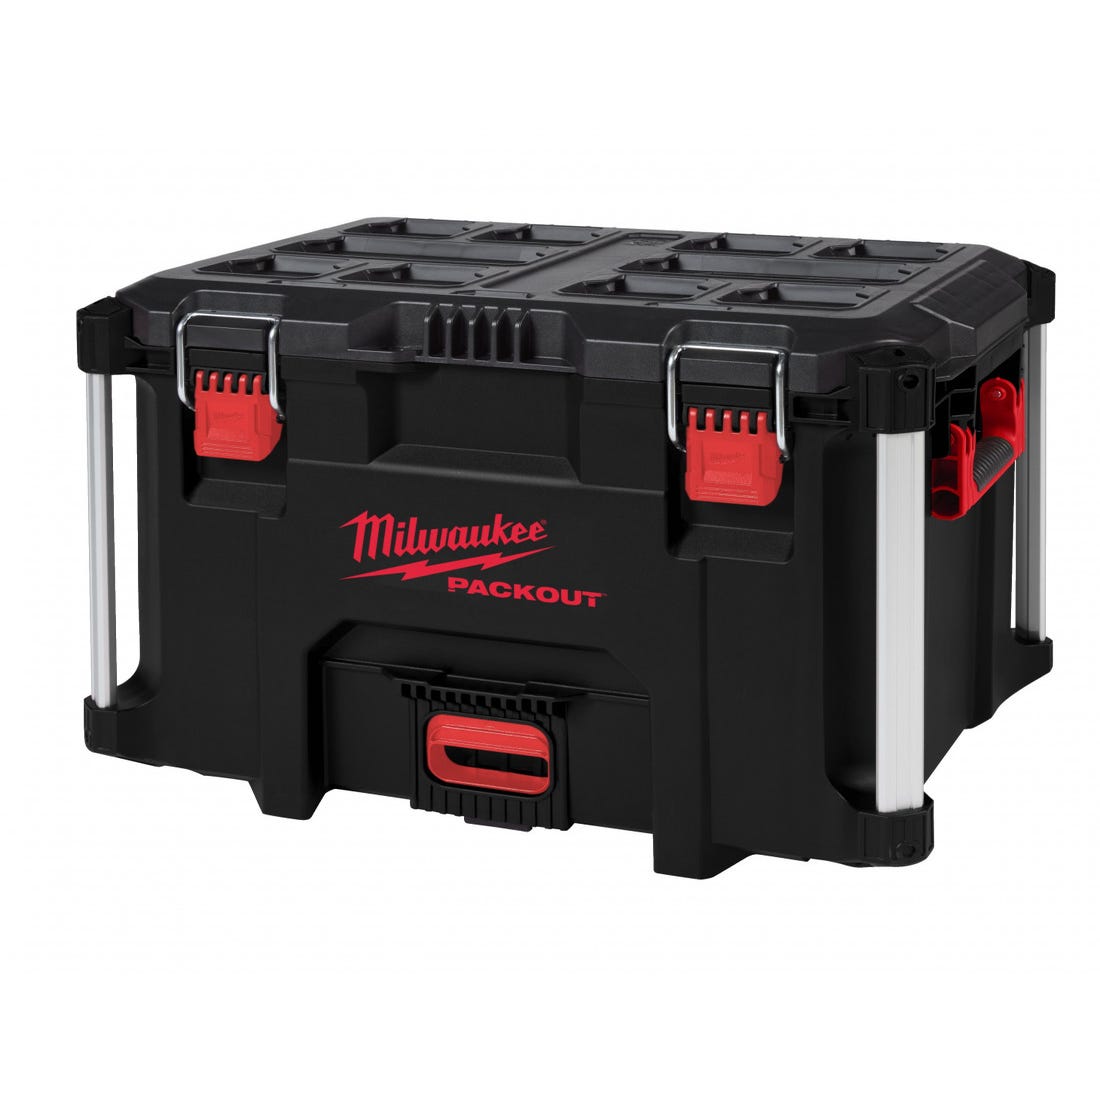 MILWAUKEE, Caisse à outils roulante Packout